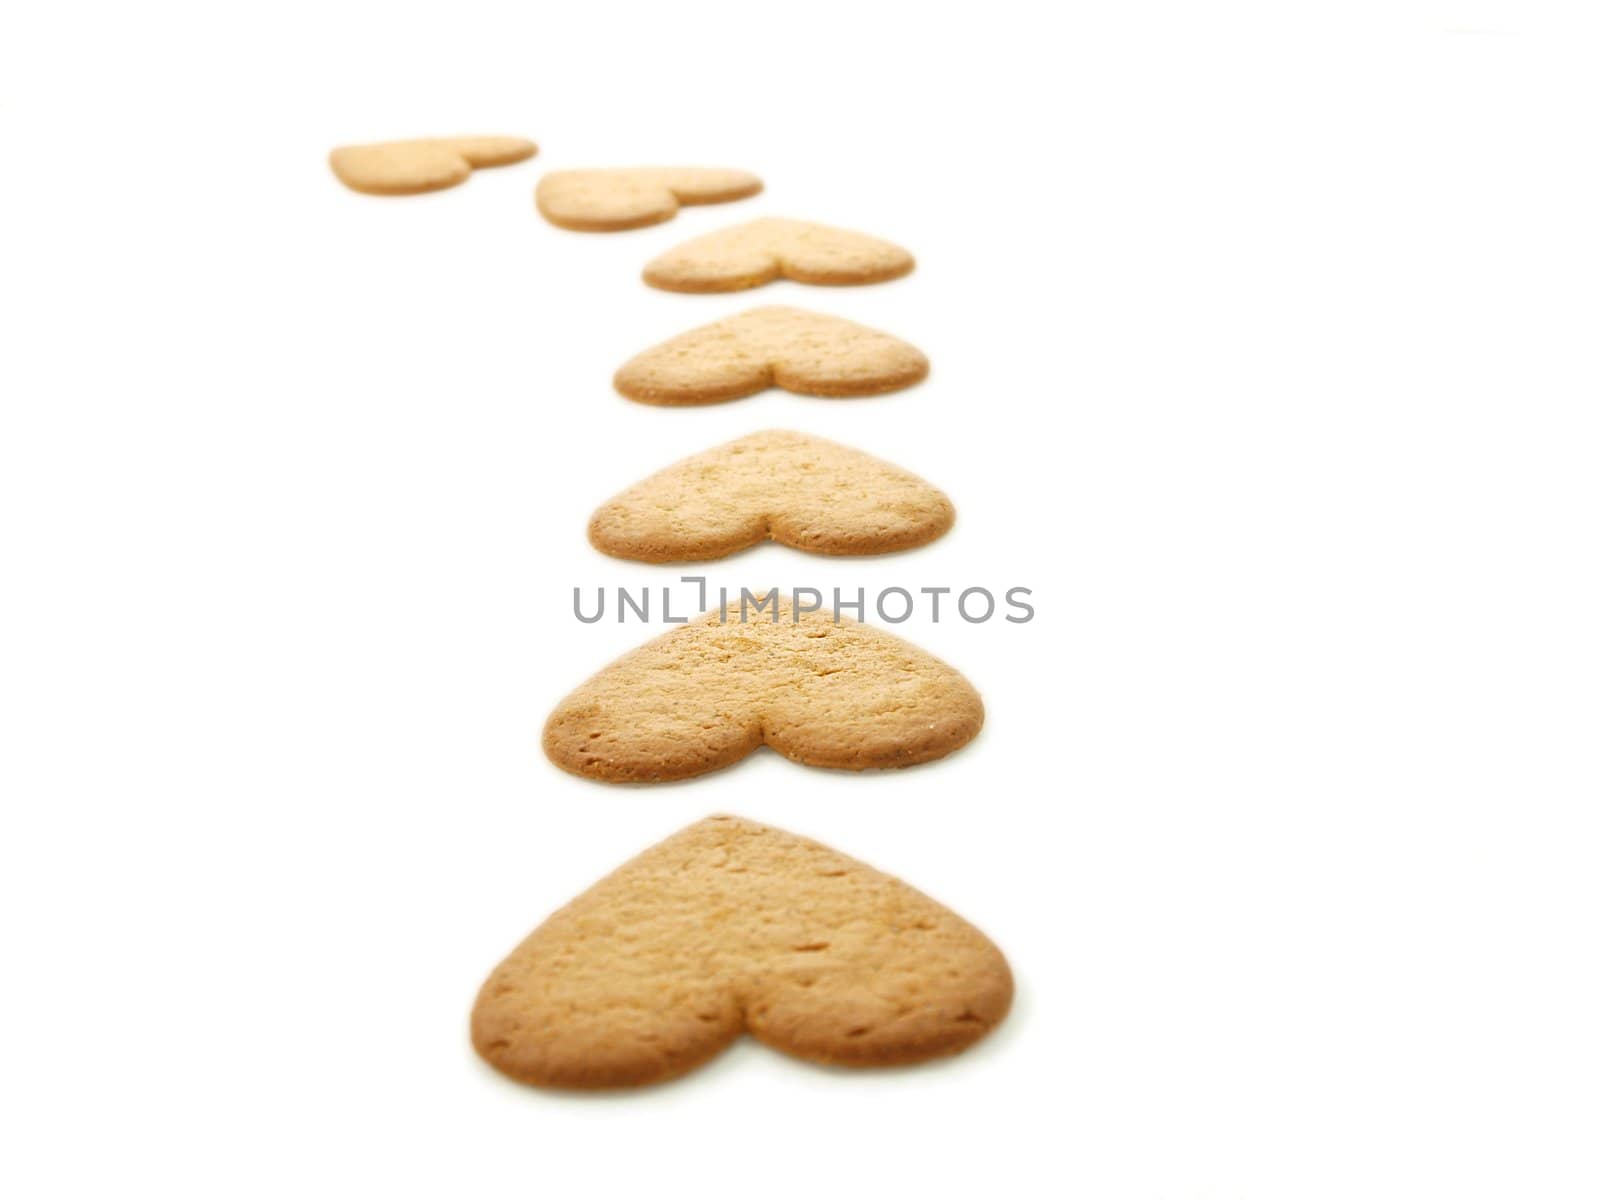 Heart shaped gingerbread, white background